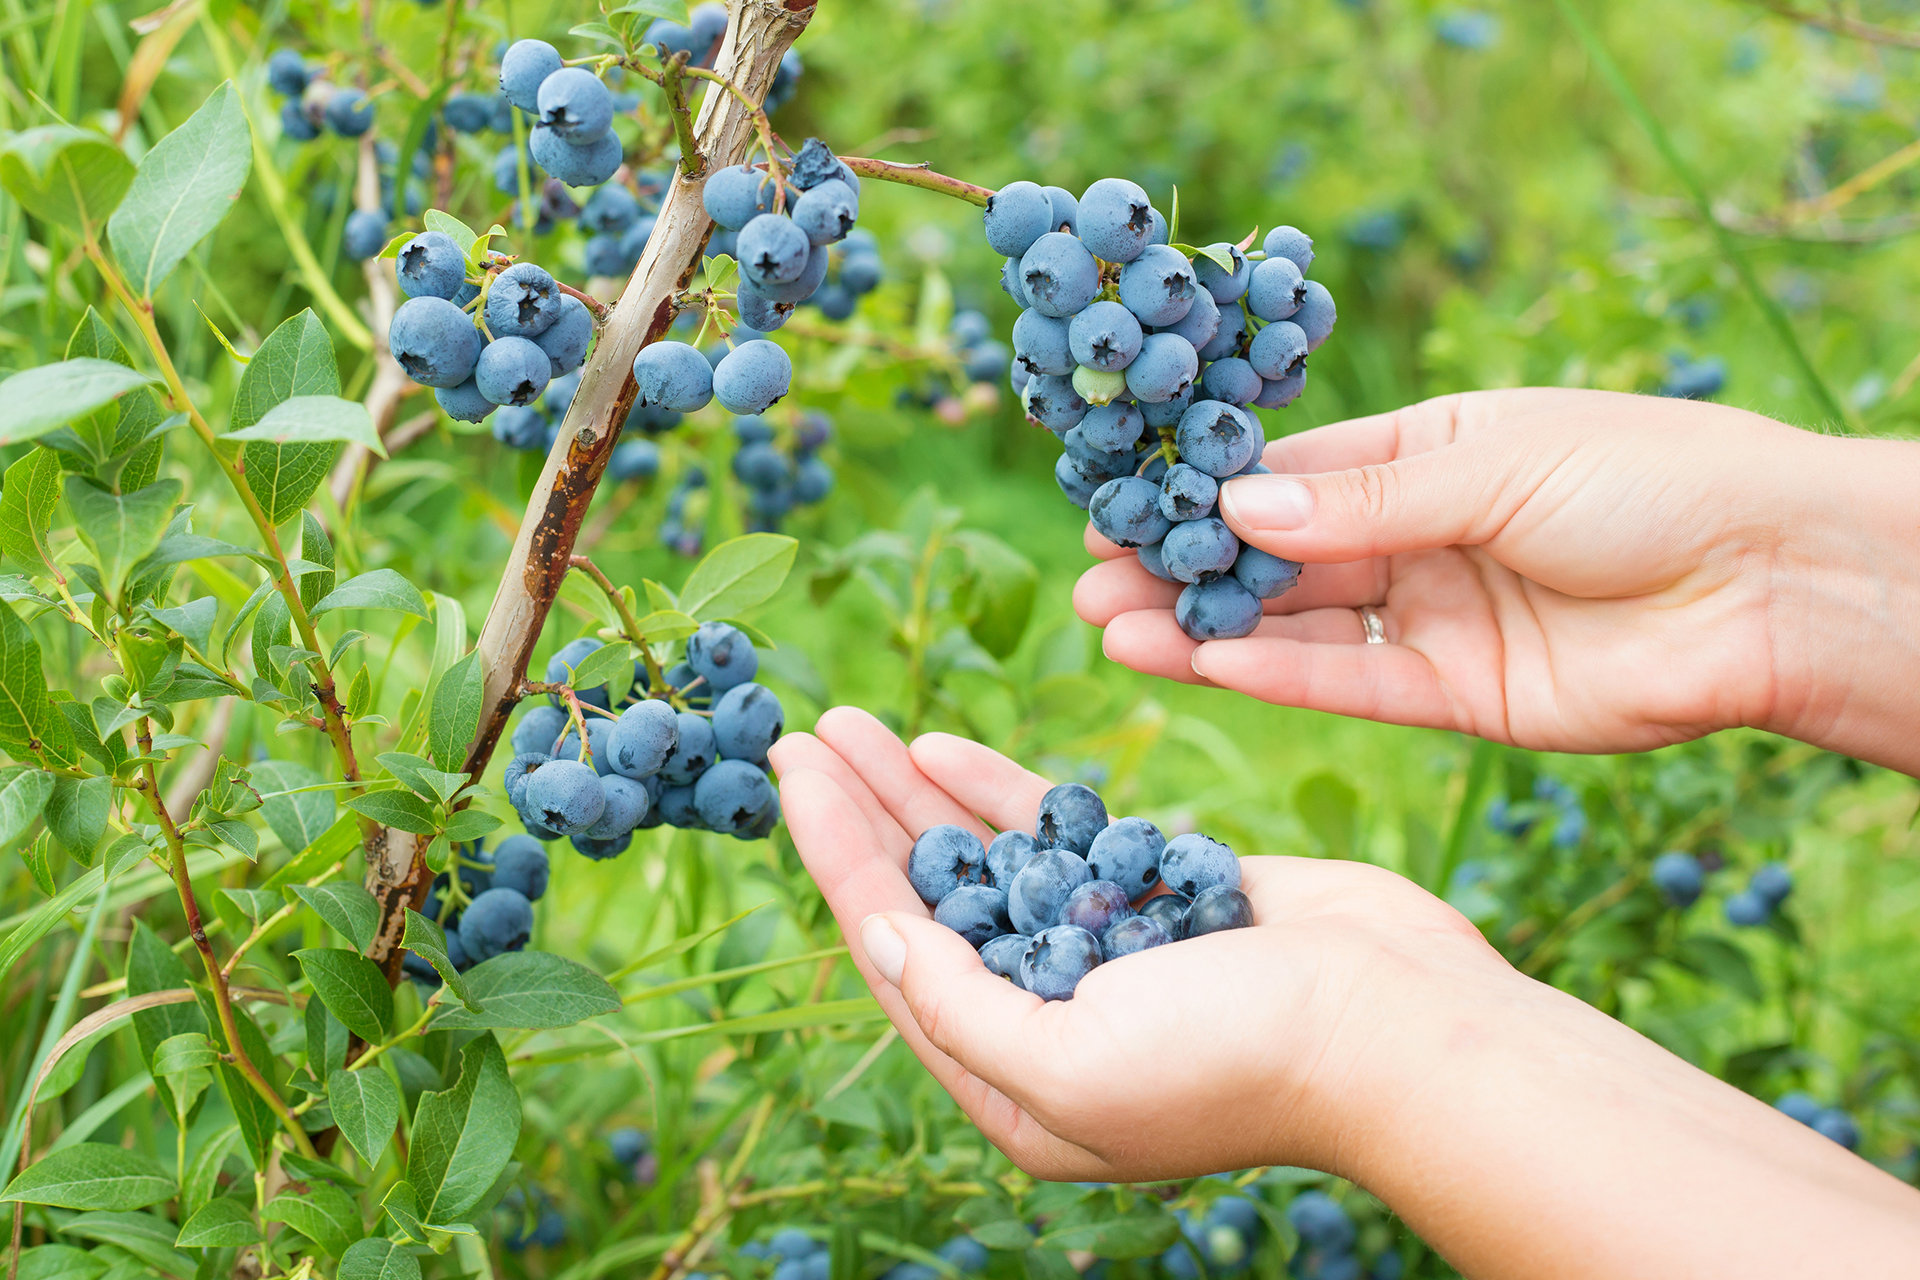 Woman collecting blueberries